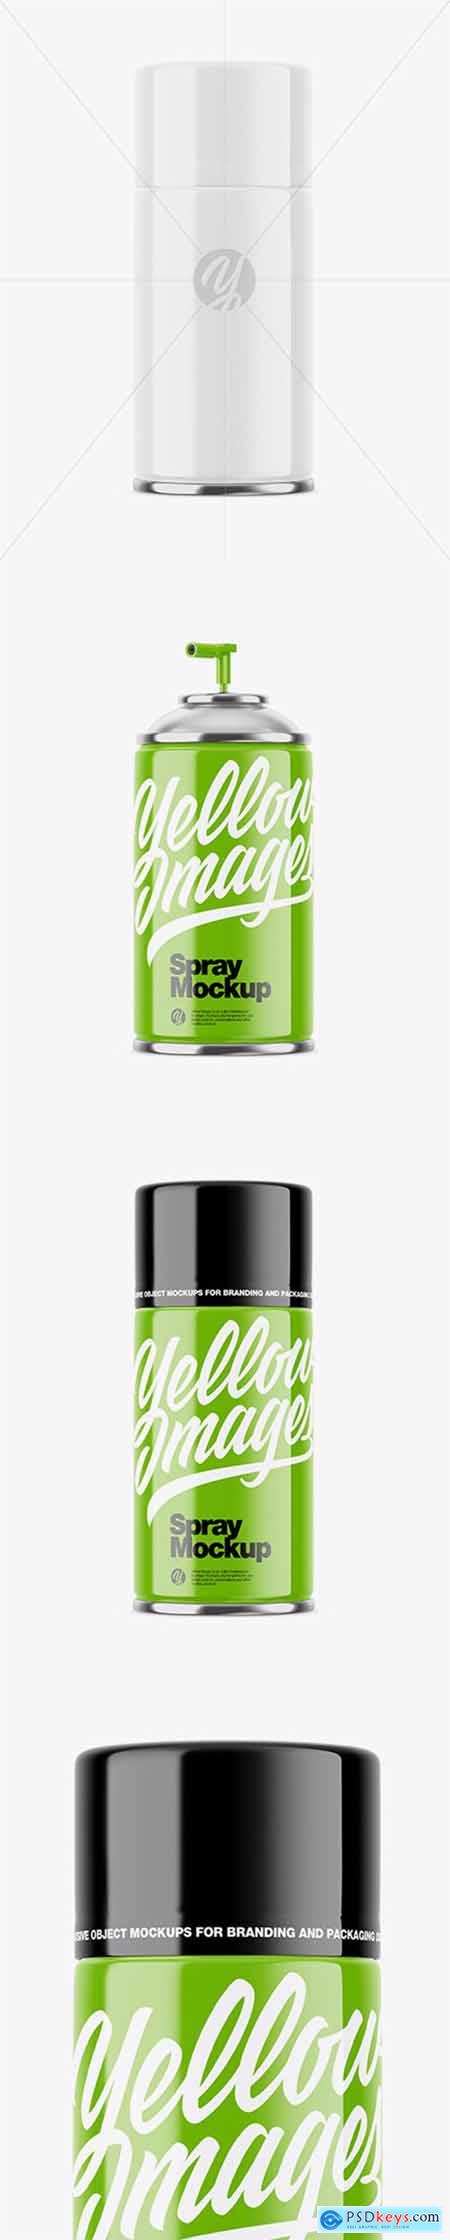 Download Product Mock-ups » page 106 » Free Download Photoshop Vector Stock image Via Torrent Zippyshare ...